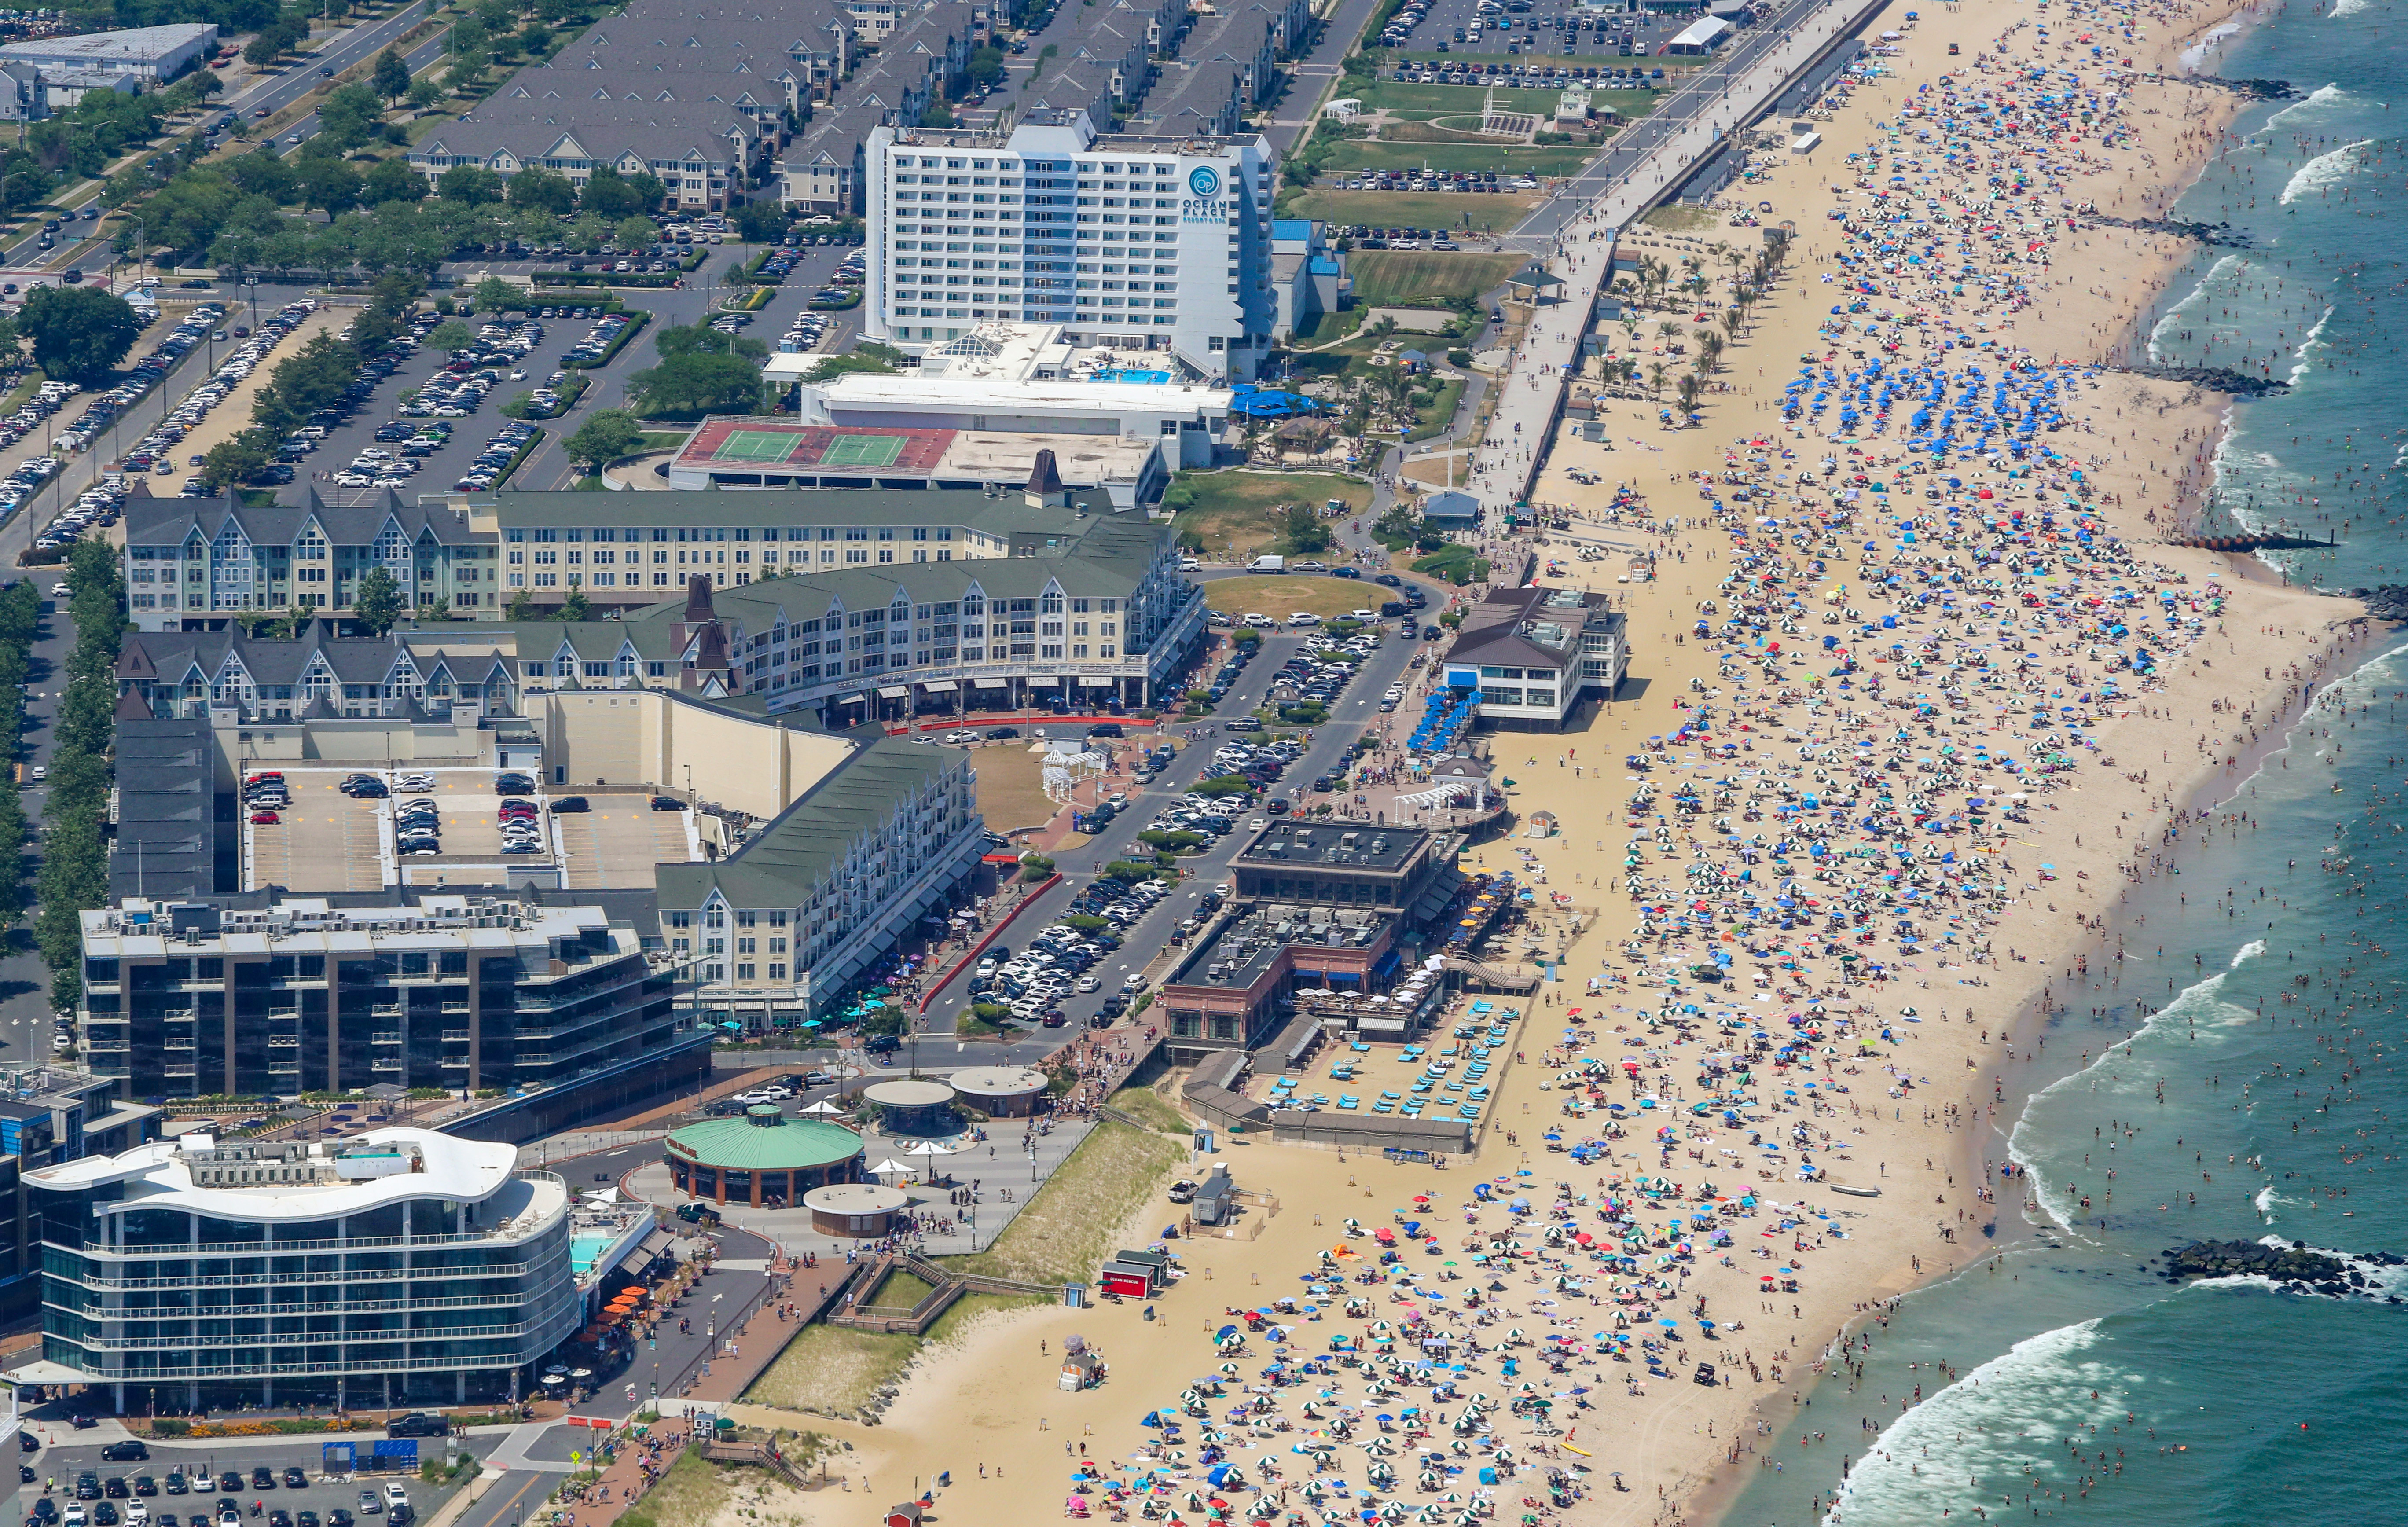 Why not in Long Branch? Young people should be able to enjoy public places,  too.